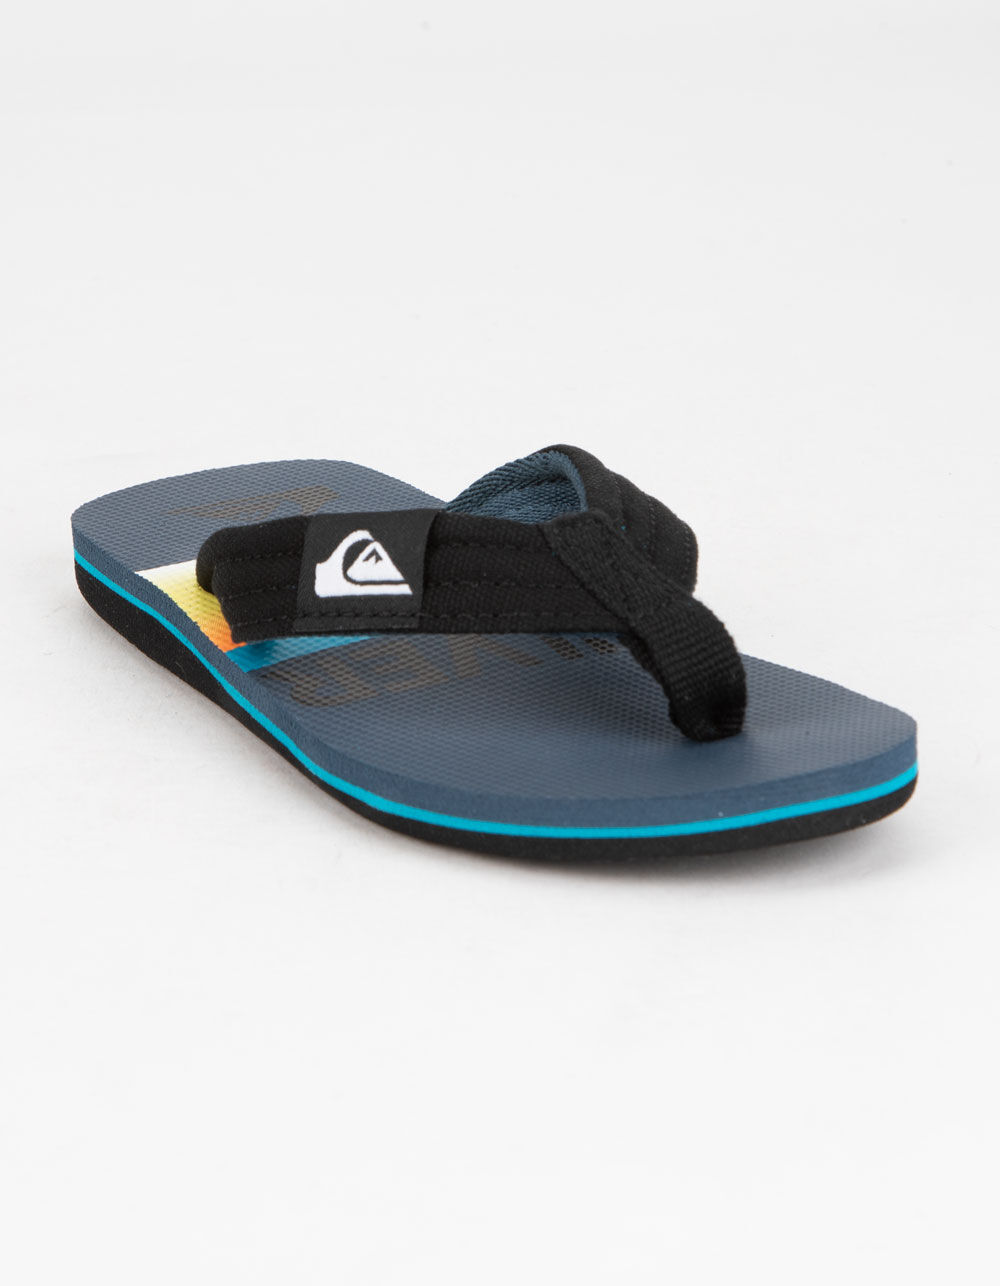 QUIKSILVER Molokai Layback Boys Sandals image number 0